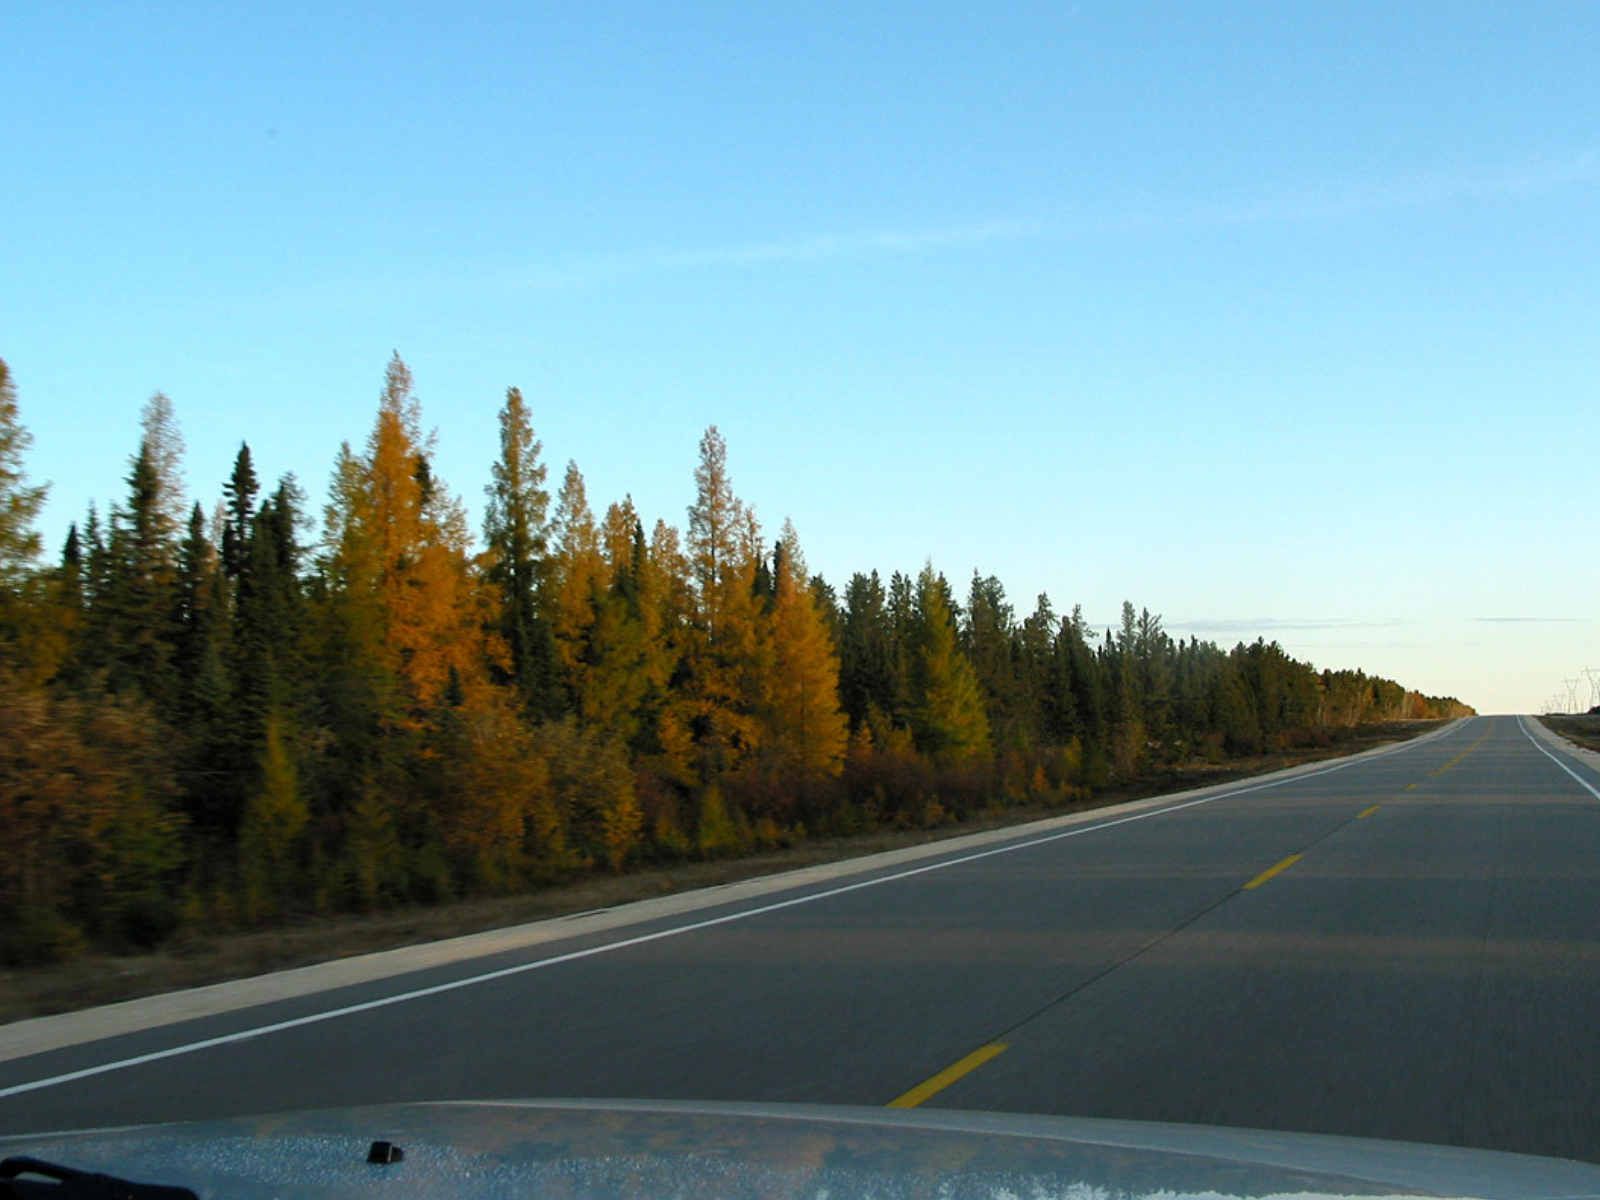 Photograph from inside a vehicel looking down a long stretch of two-way road. Tree along the left side of the road are bathed in evening sunlight under a blue sky,